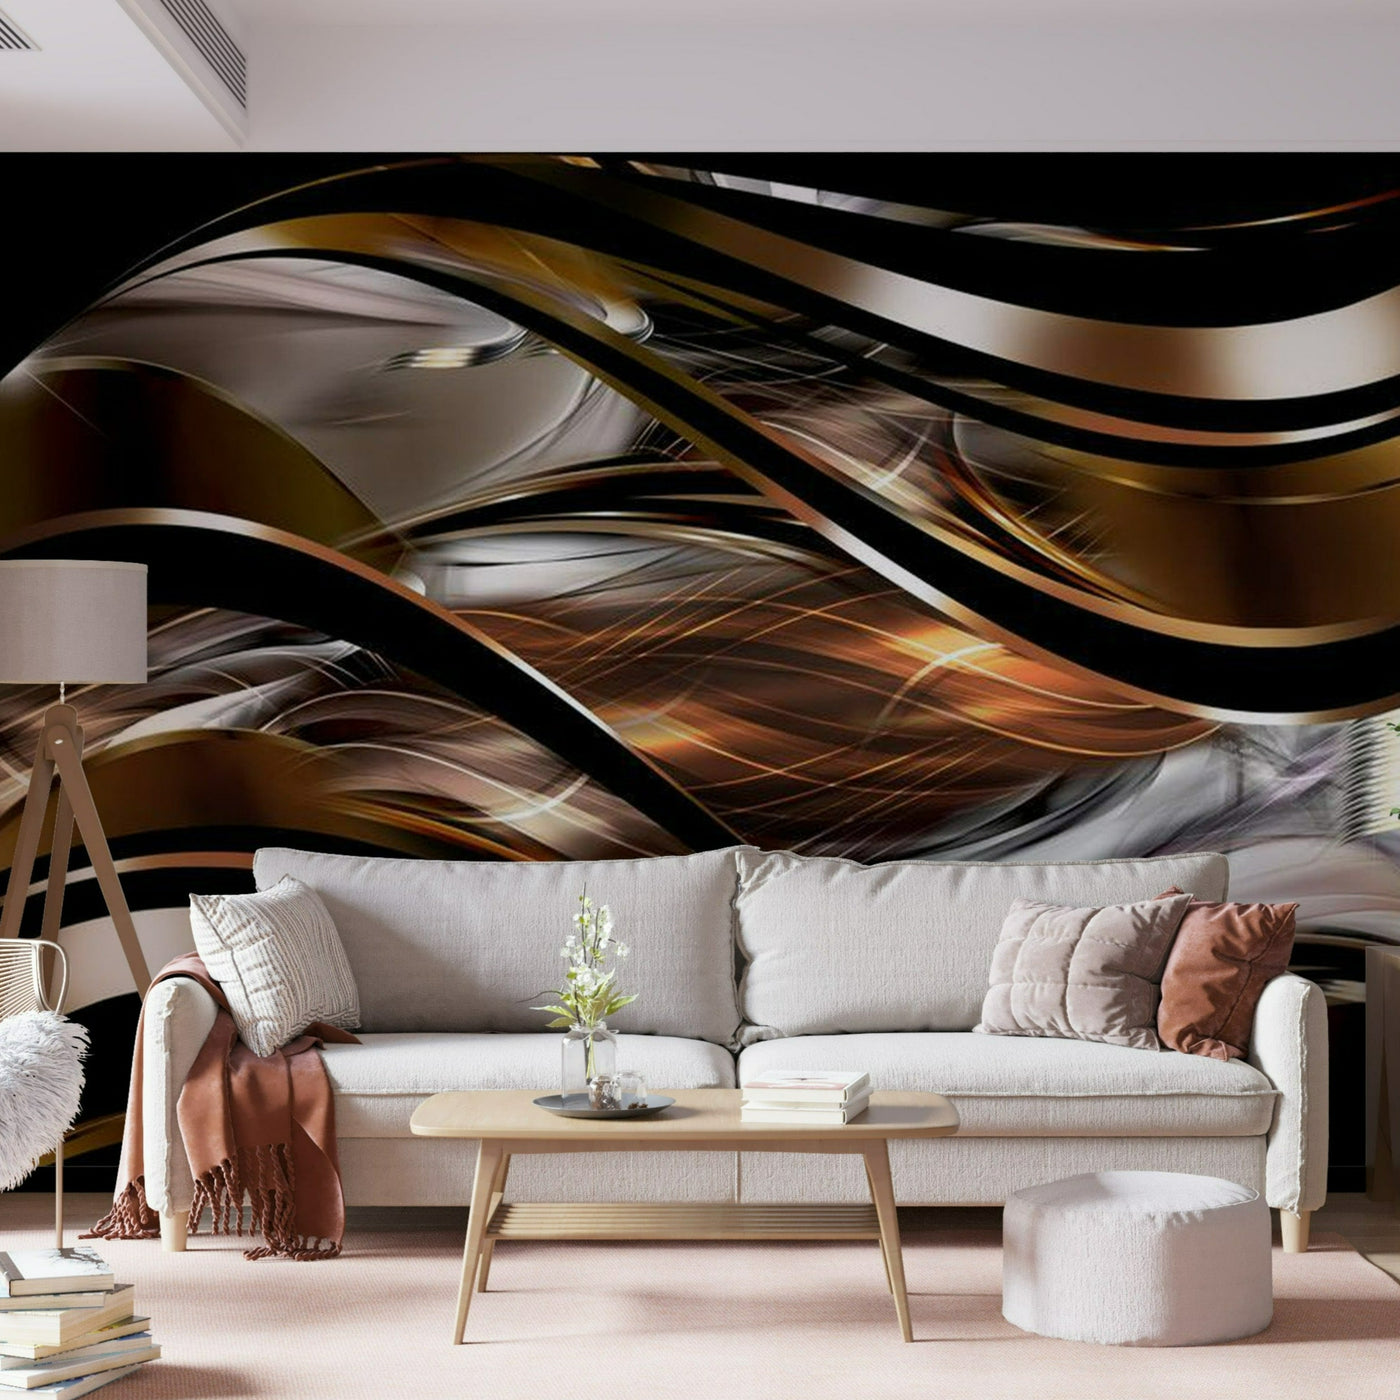 Peel & Stick Glam Wall Mural - Amber Storm - Removable Wall Decals